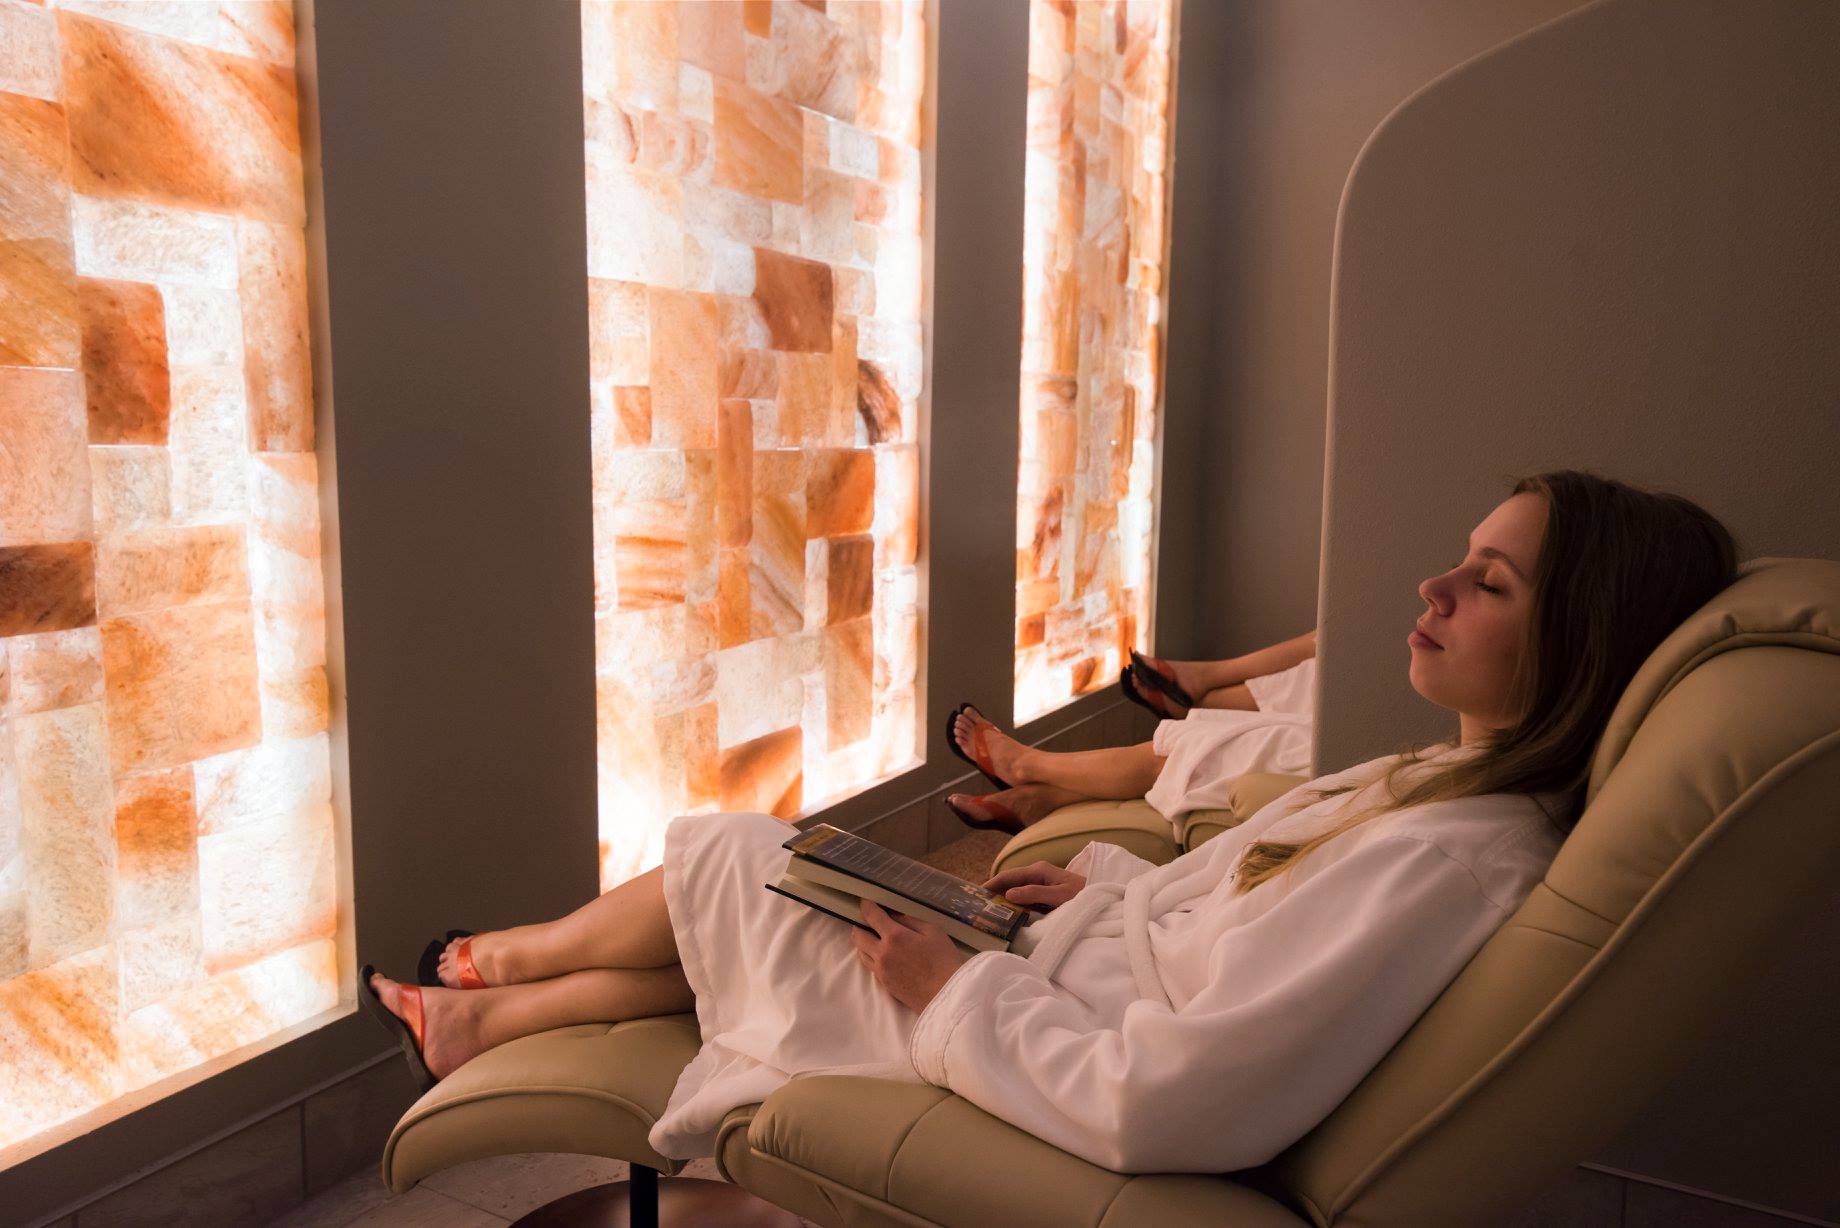 Woman In A White Robe Relaxing In A Lounge Chair Facing A Led Backlit Salt Panel Wall At The Sundara Inn And Spa - Wisconsin Dells, Wisconsin.